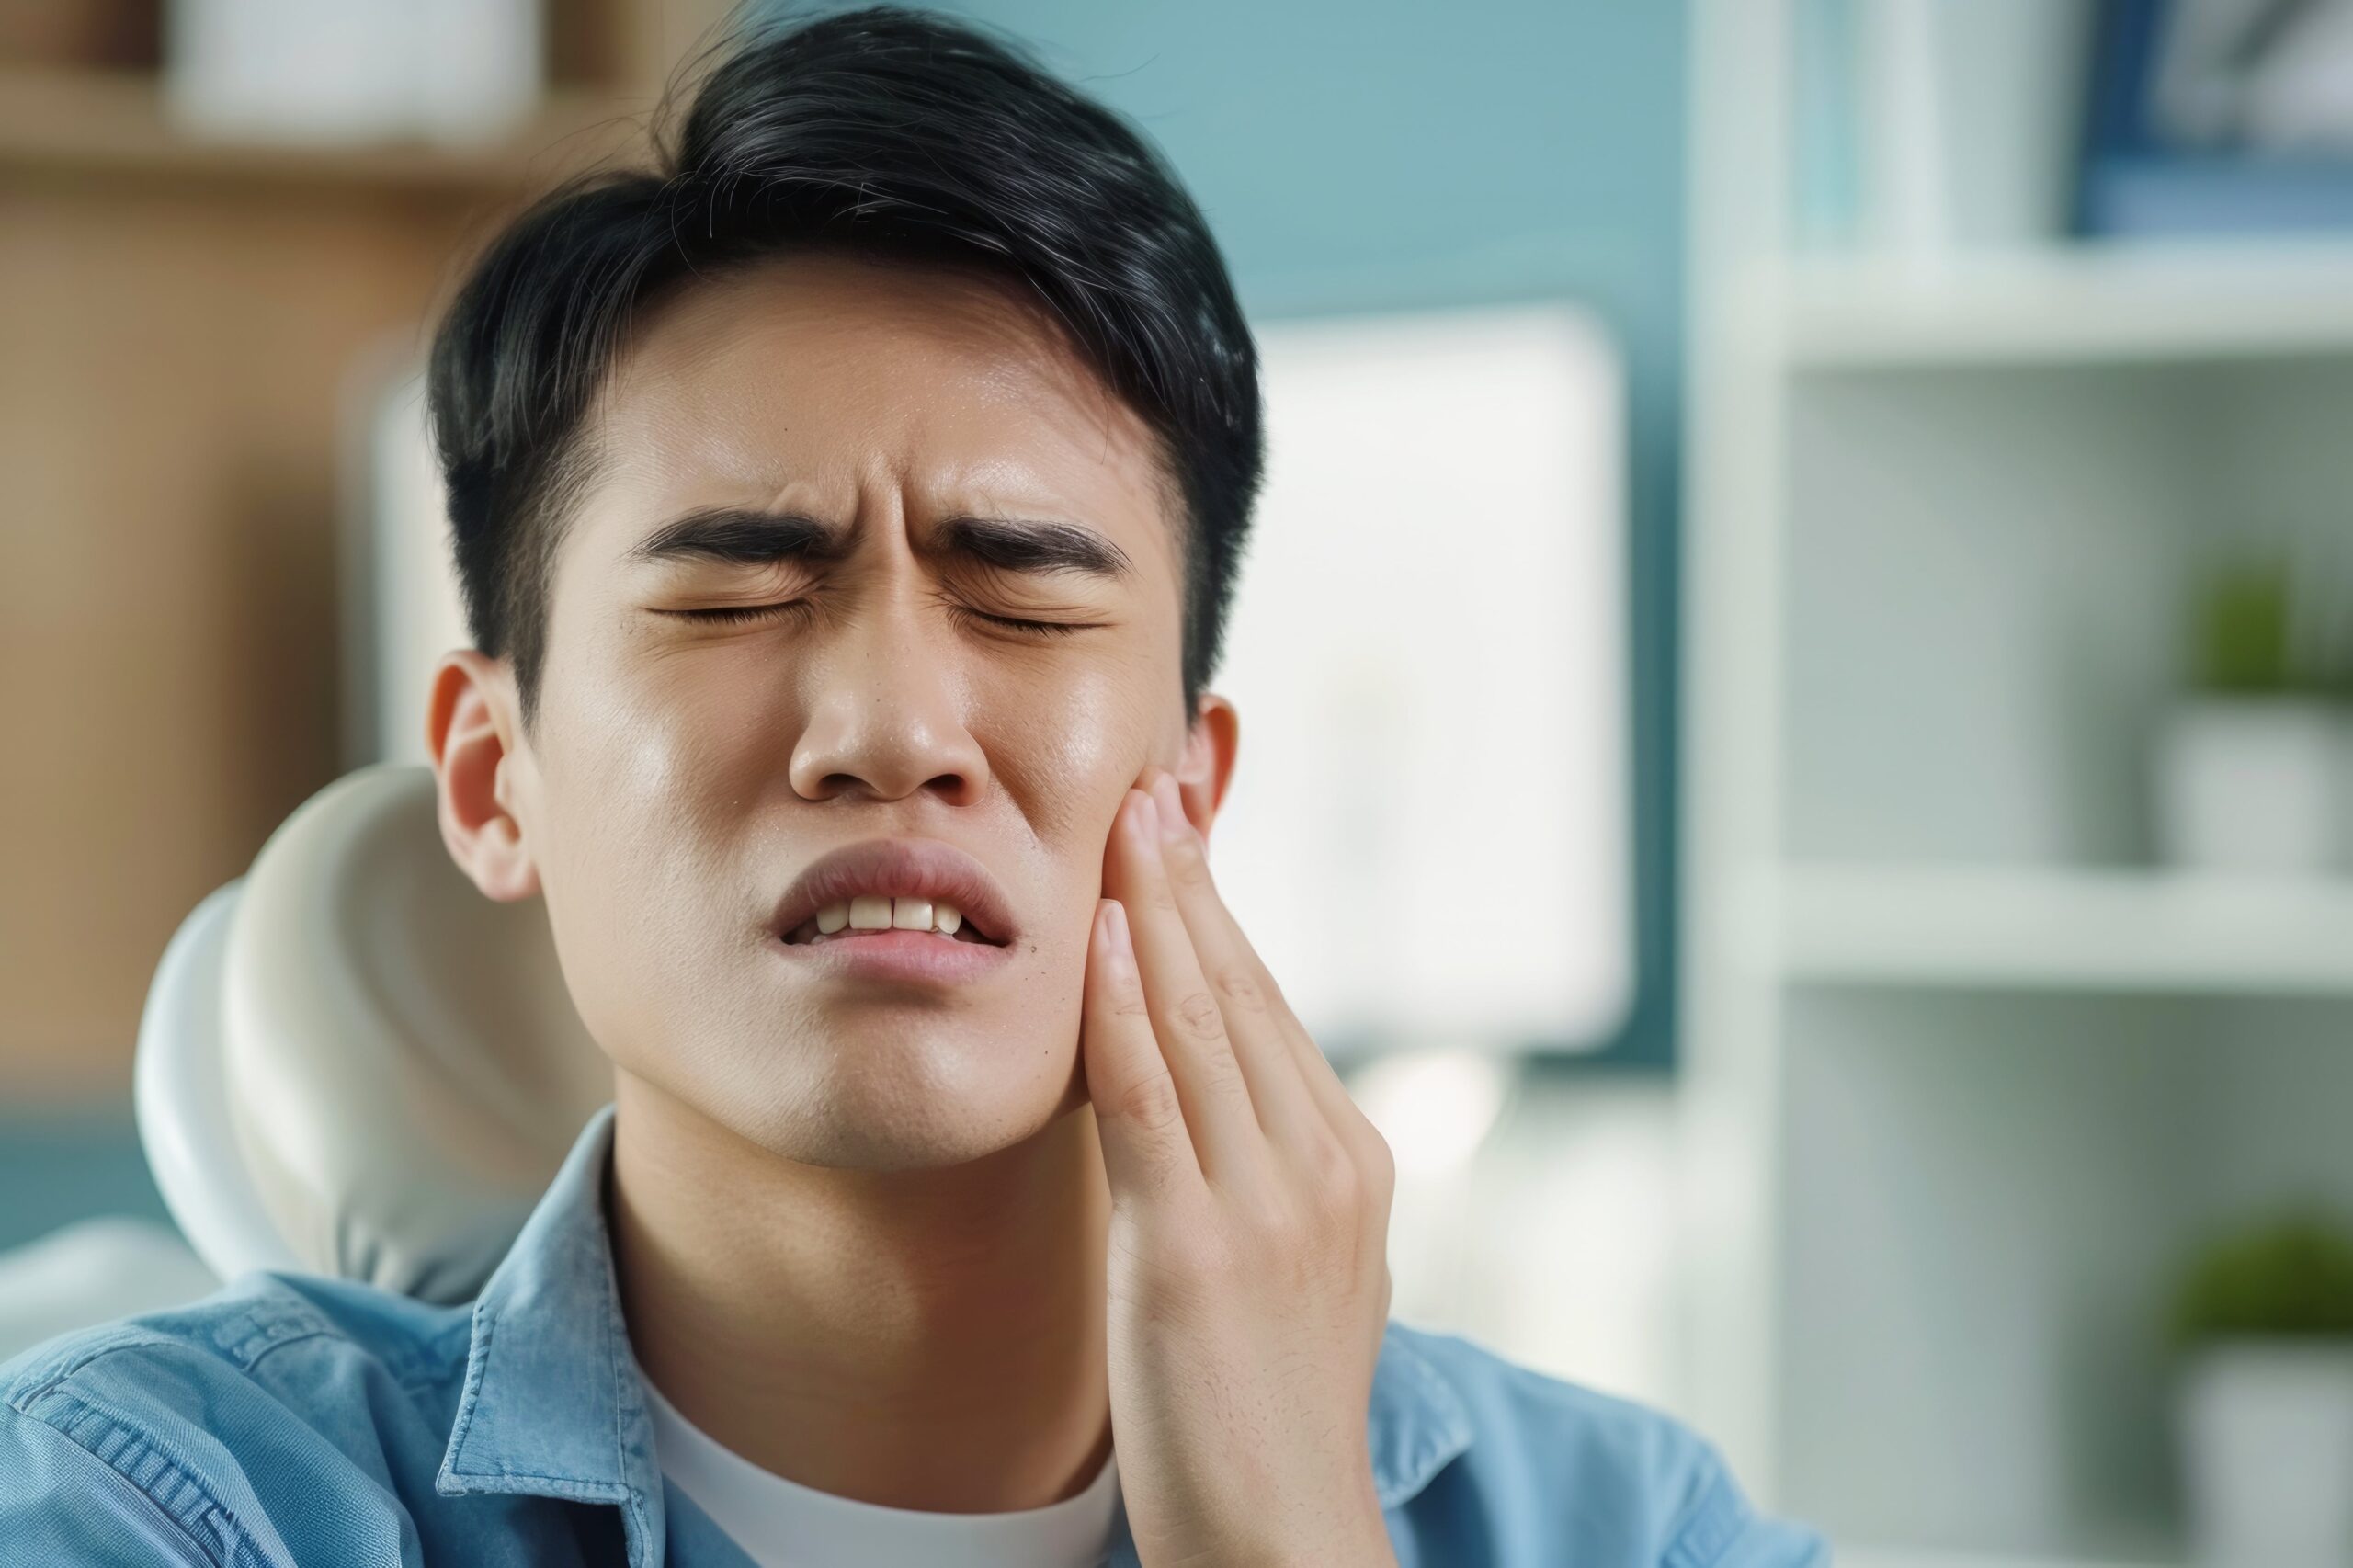 6 Common Problems Patients Experience With Tooth Implants